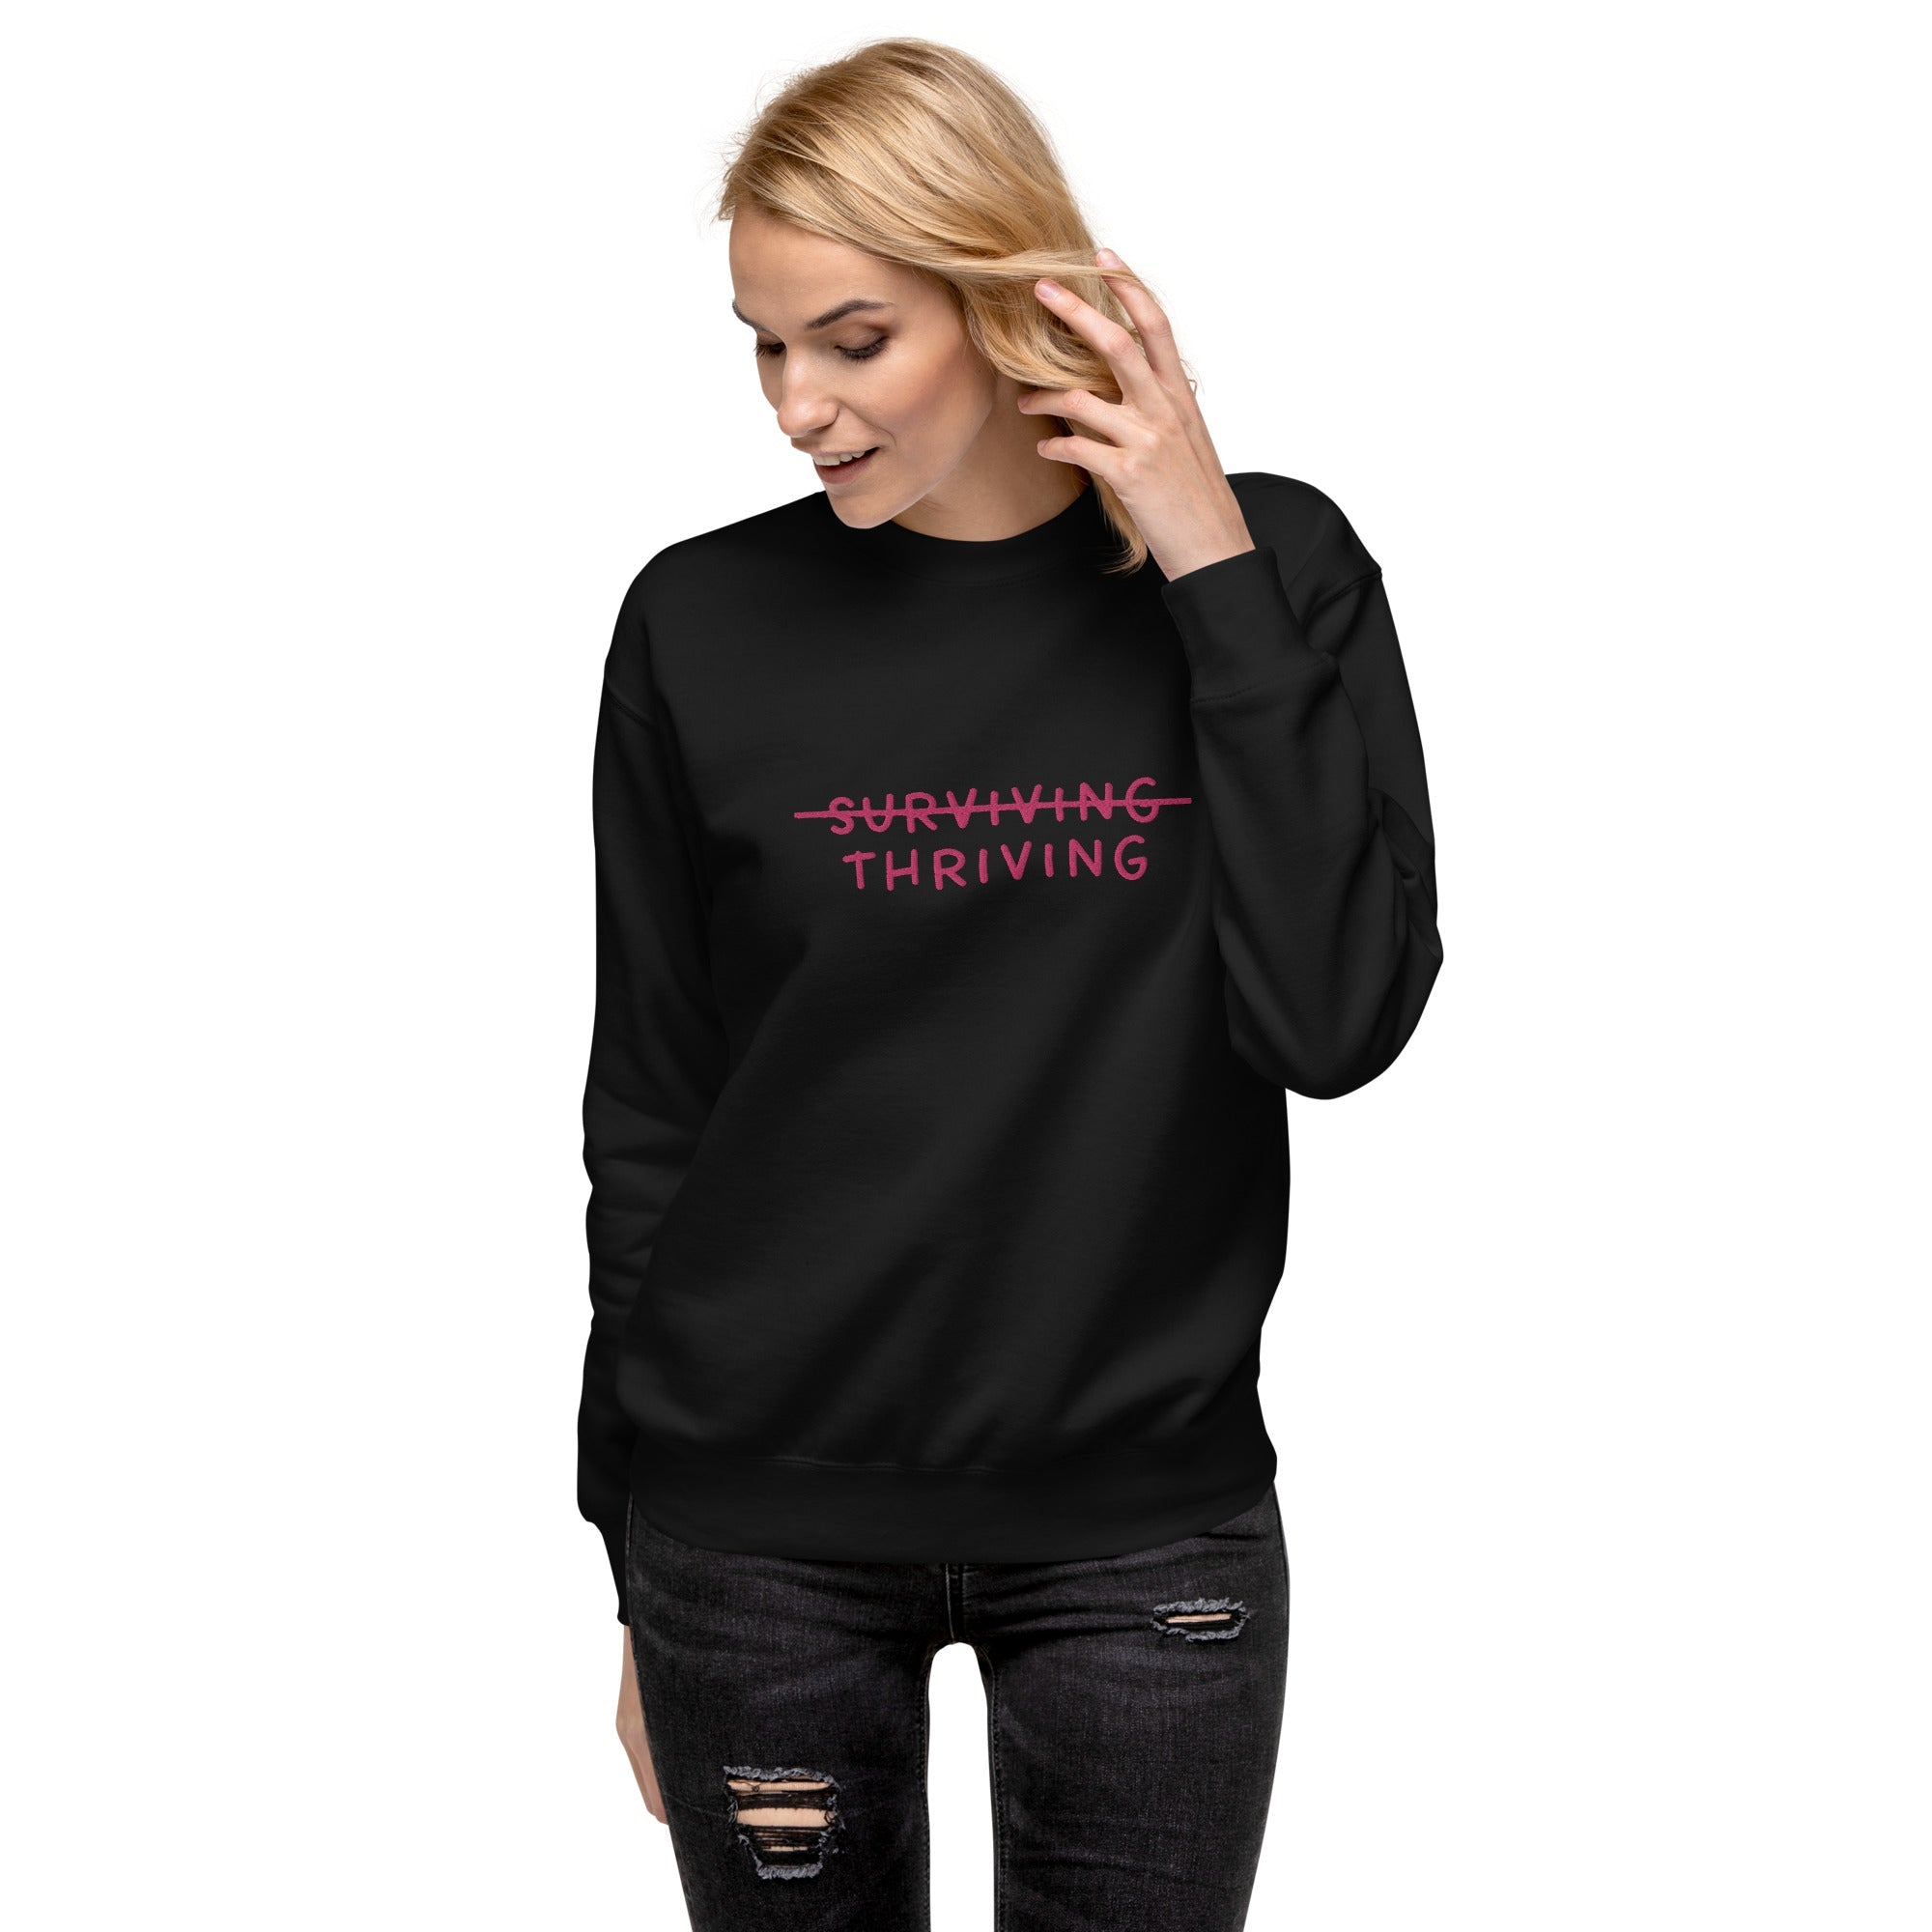 Thriving Not Surviving Embroidered Unisex Premium Sweatshirt - The Kindness Cause